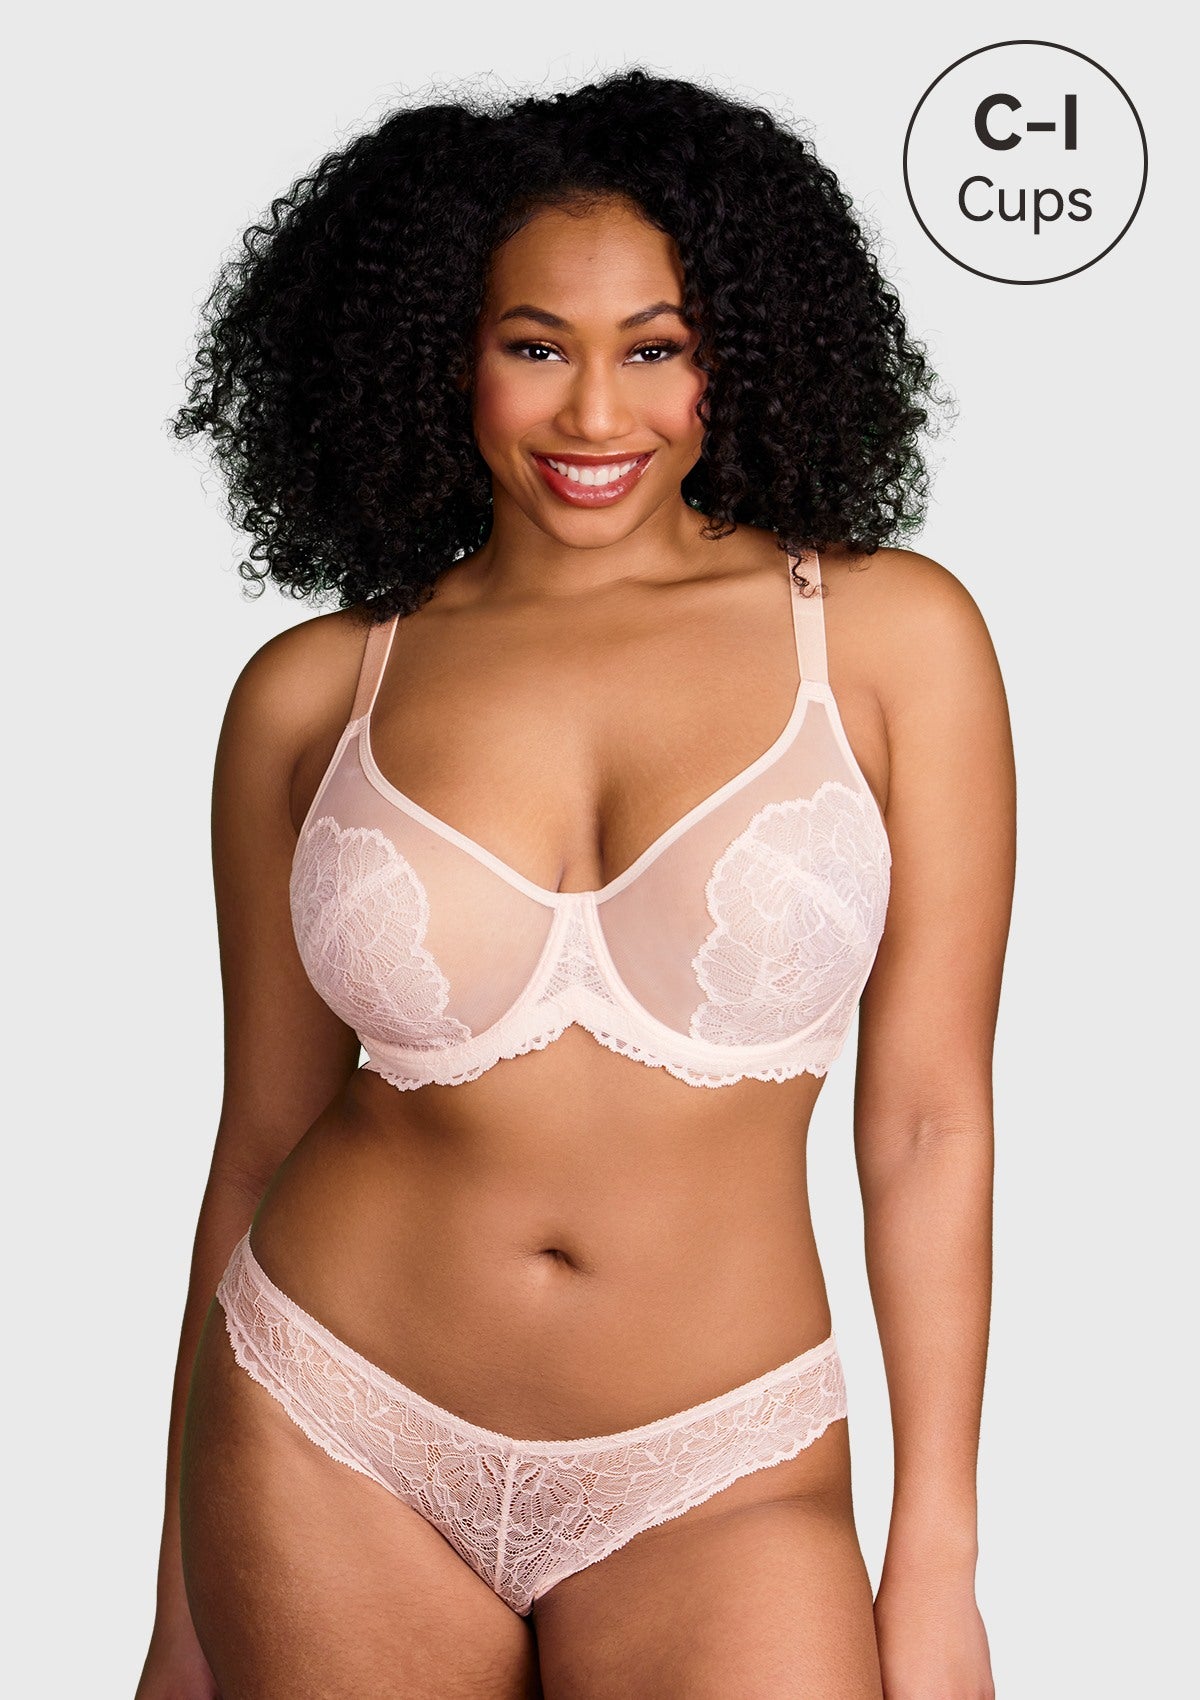 HSIA Blossom Sheer Lace Bra: Comfortable Underwire Bra For Big Busts - Dusty Peach / 42 / H